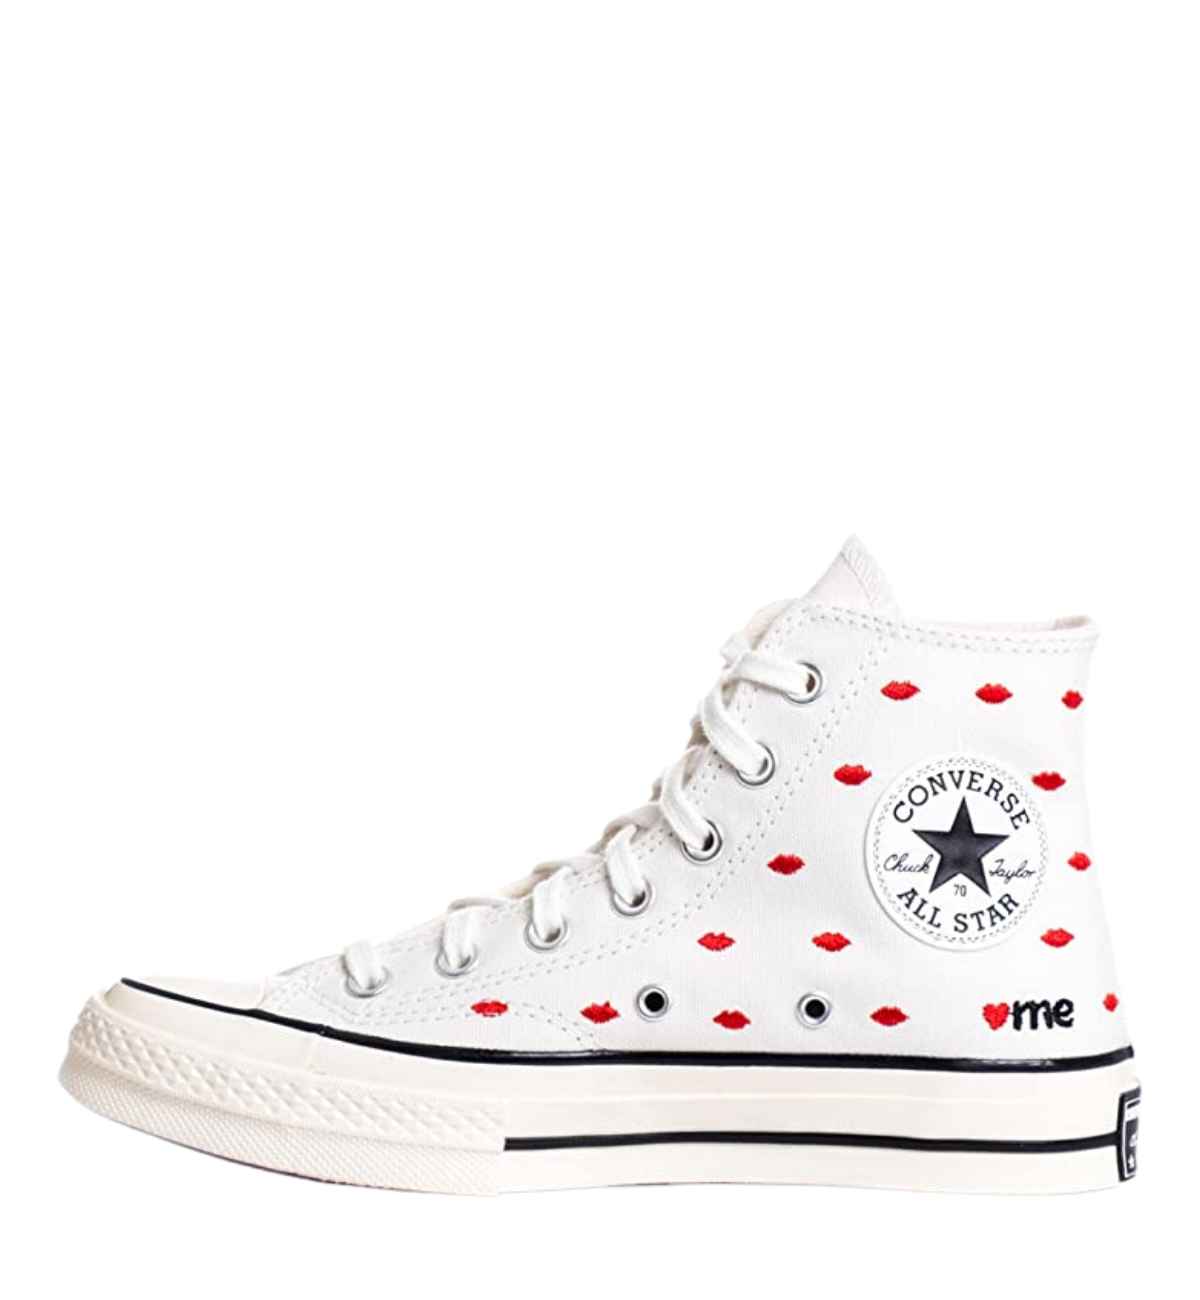 White high-top heart sneaker with red lip pattern all over with white laces on white background.